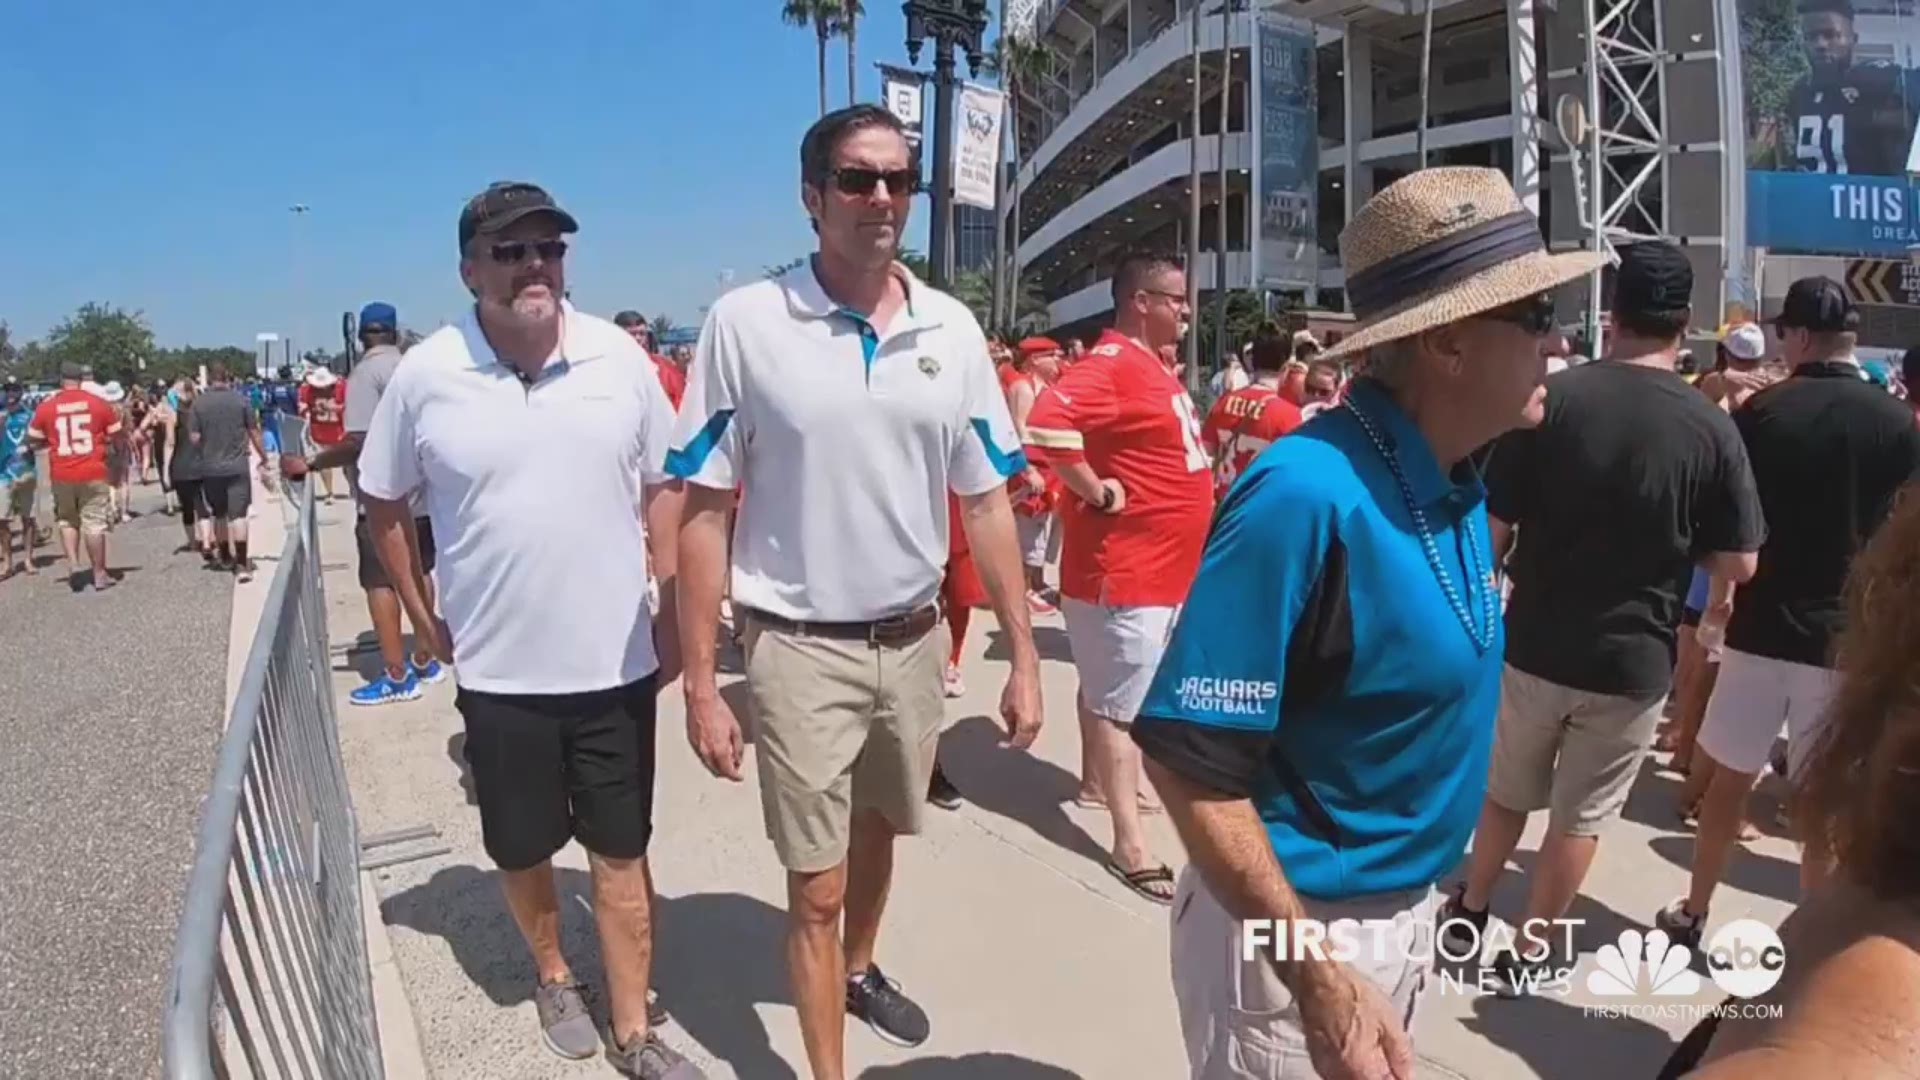 The Jacksonville Jaguars relaxed the rules Sunday at TIAA Bank Field allowing fans to bring in a sealed bottle of water due to the heat.